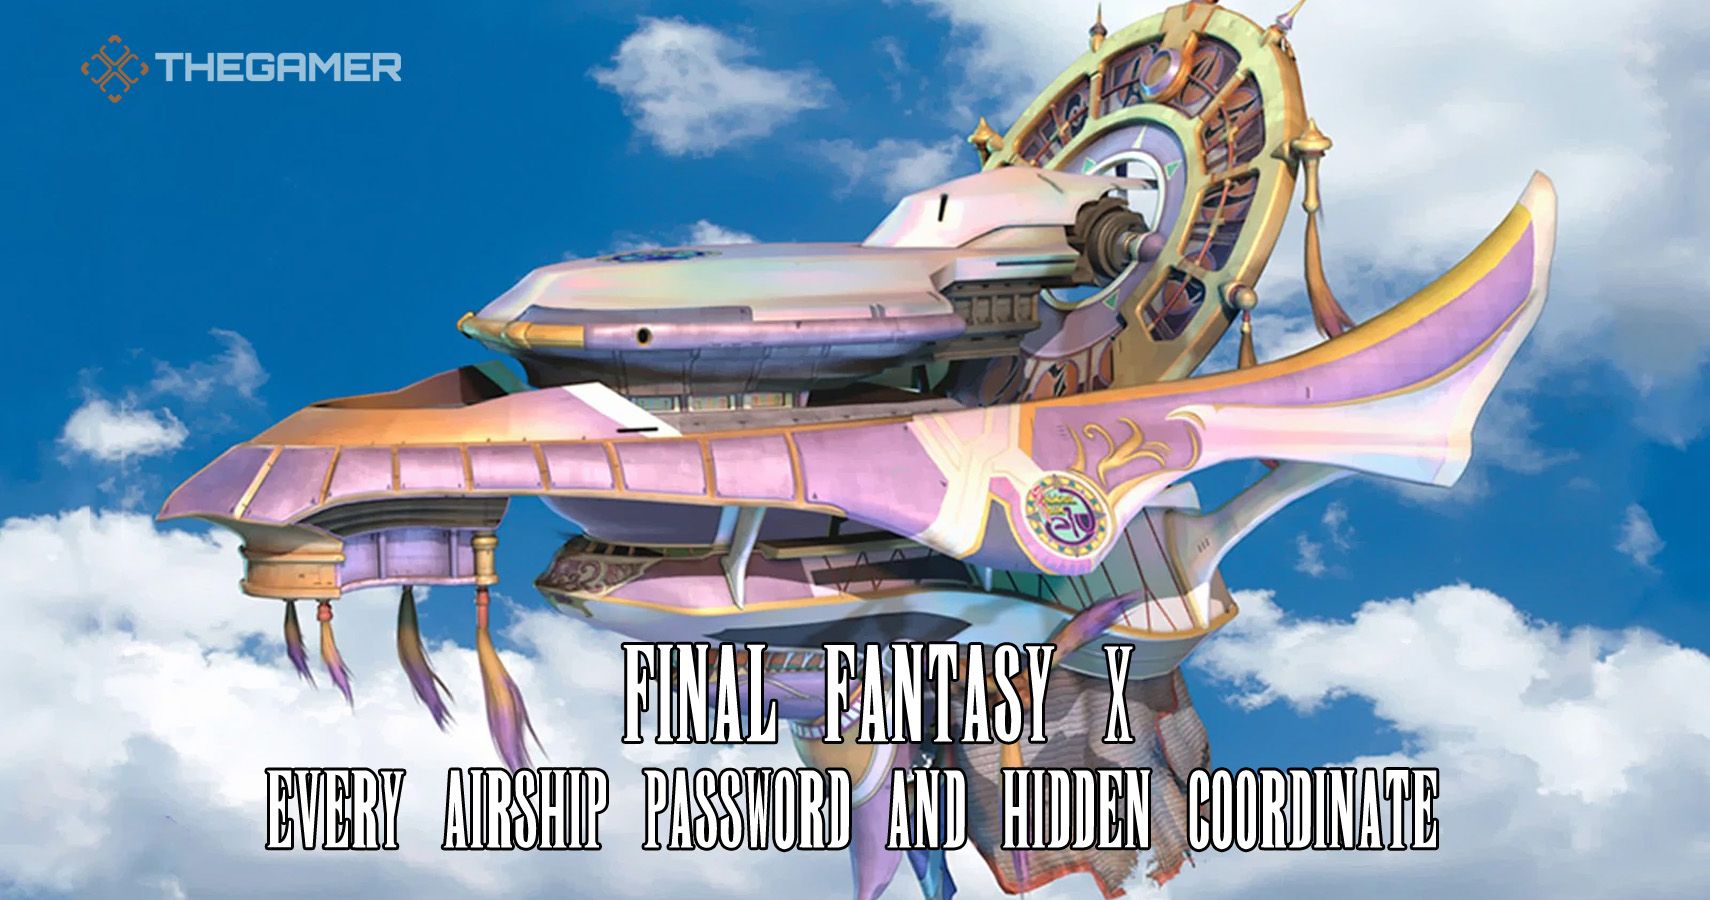 Final Fantasy 10- Every Airship Password And Hidden Coordinate